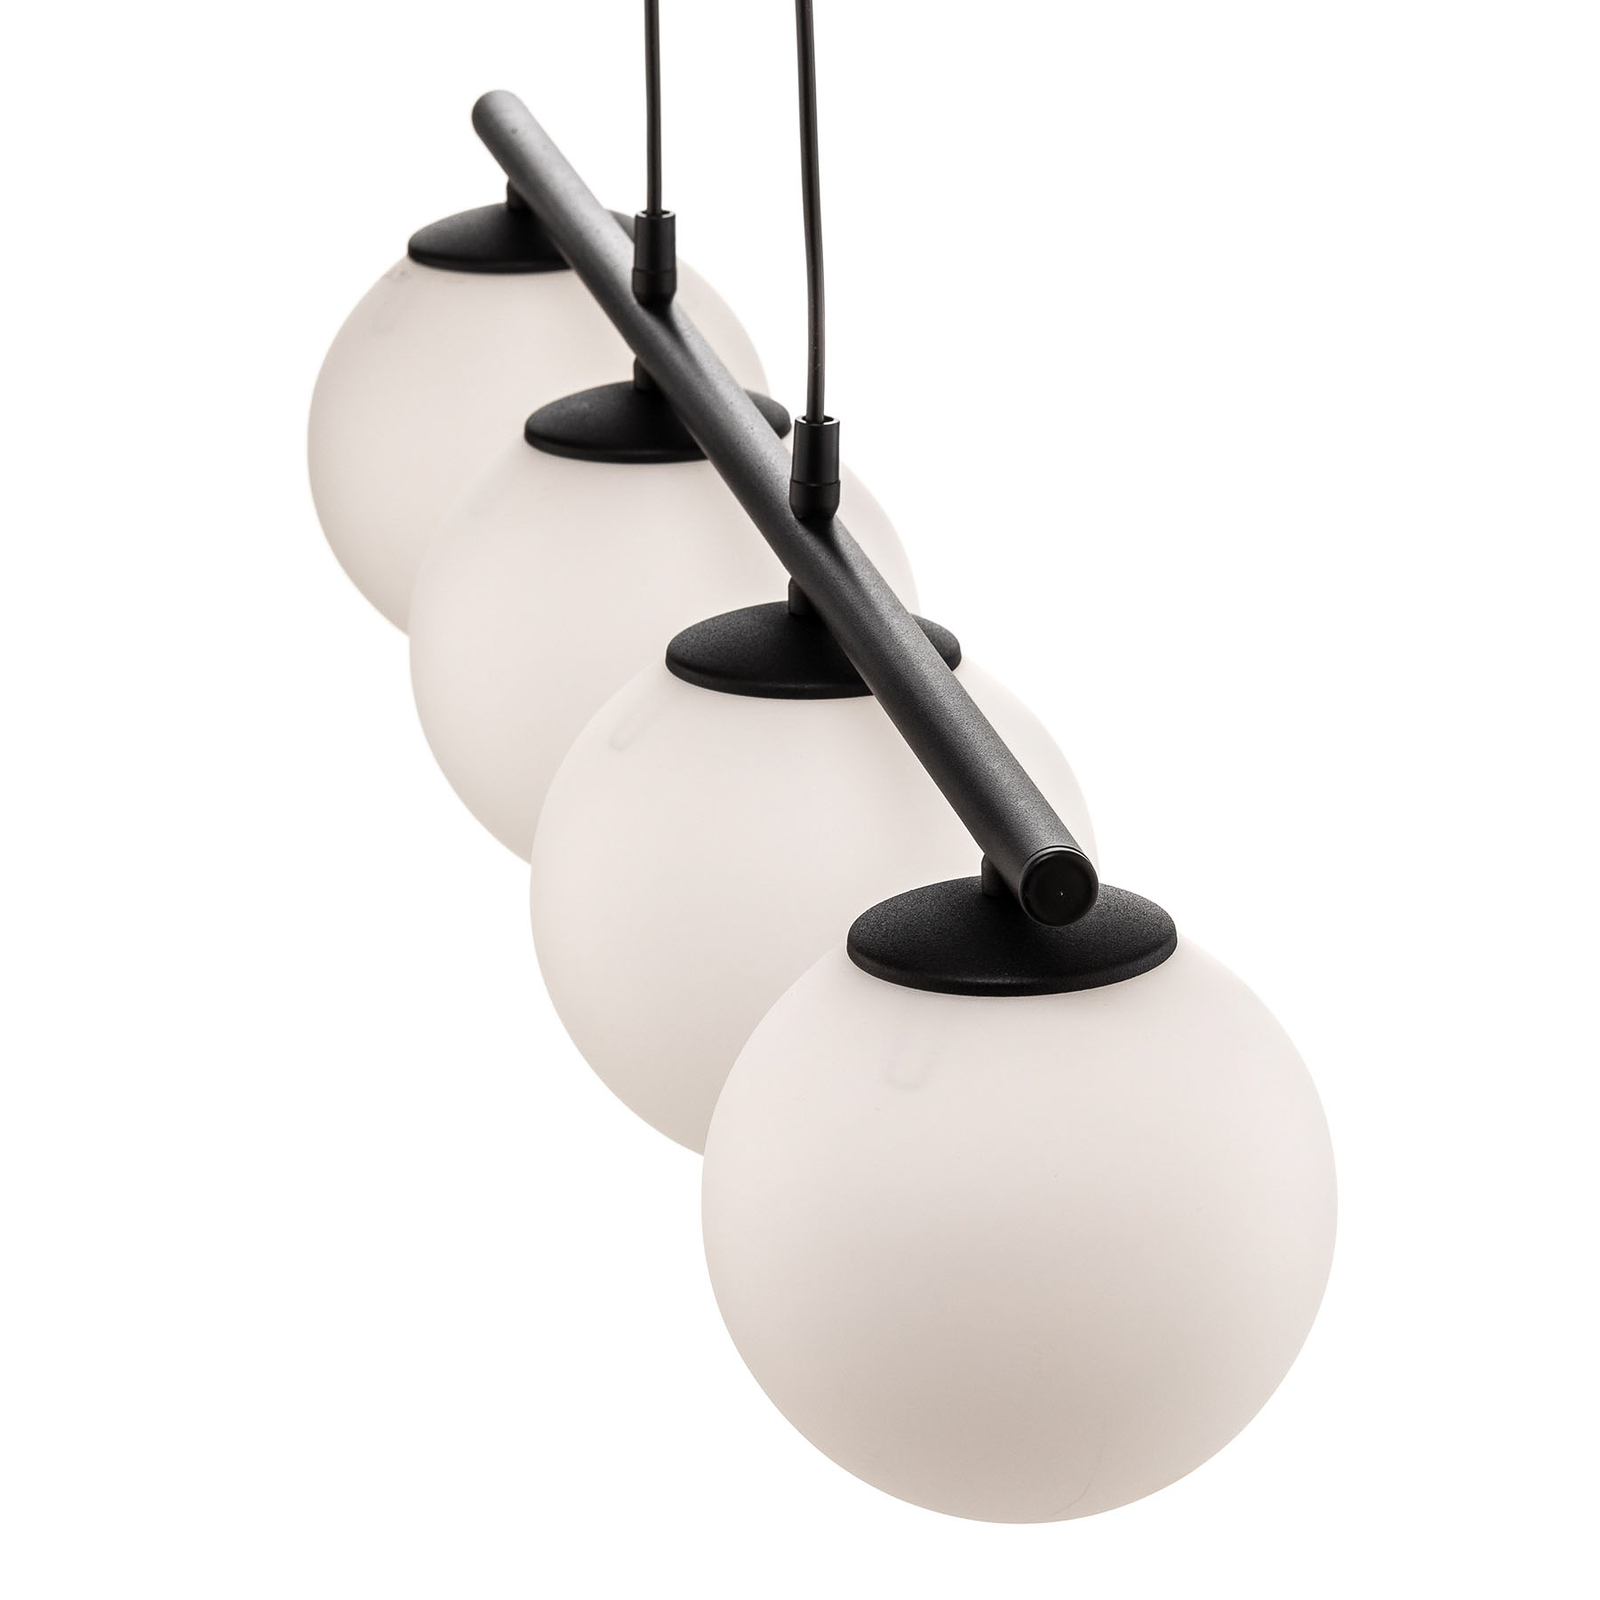 Maxi pendant light with glass shades, 4-bulb